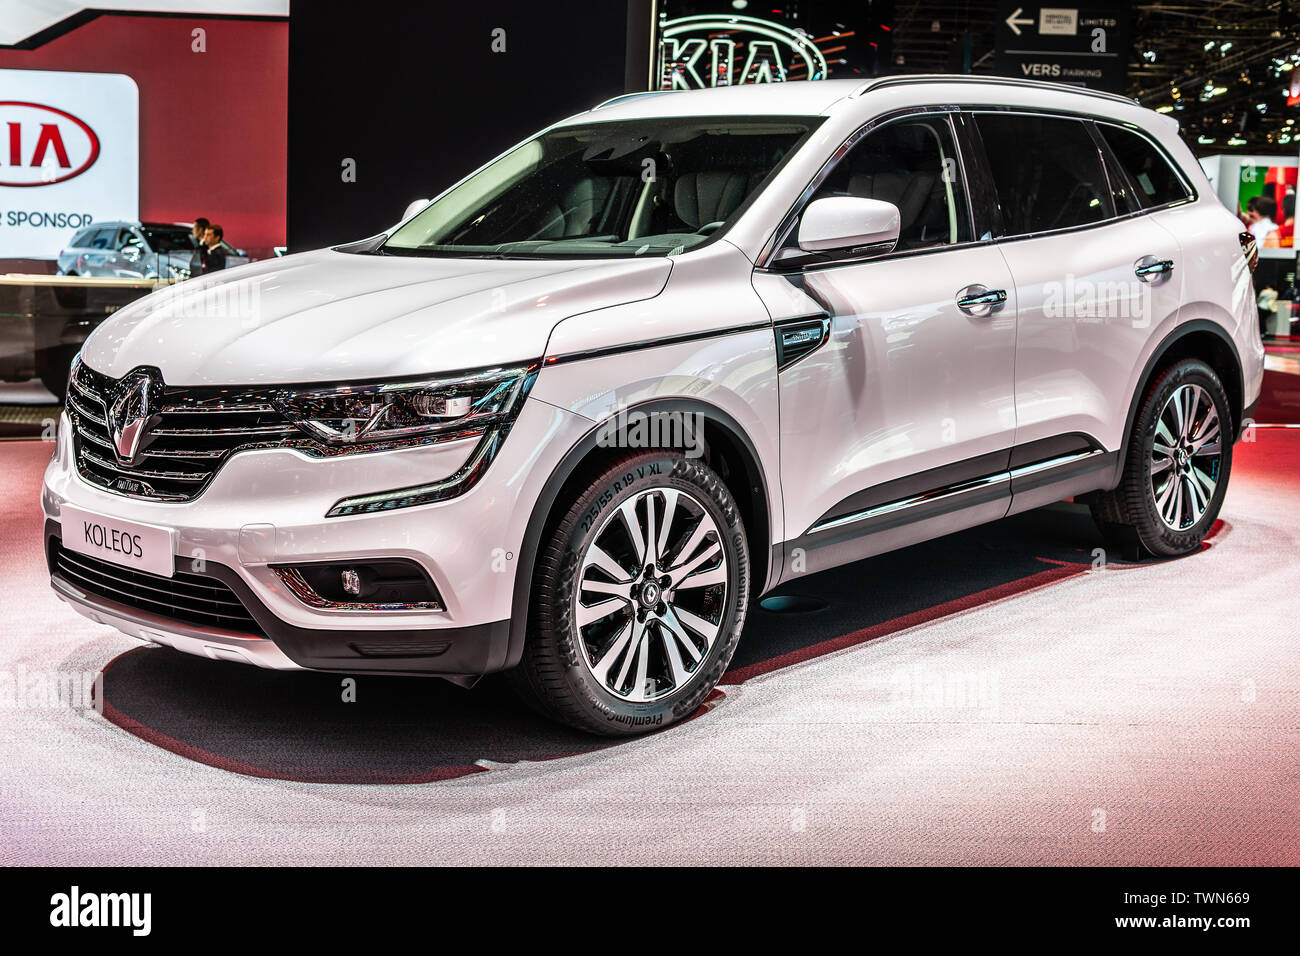 https://c8.alamy.com/comp/TWN669/paris-france-oct-2018-metallic-white-renault-koleos-ii-at-mondial-paris-motor-show-2nd-gen-compact-crossover-suv-produced-by-renault-TWN669.jpg